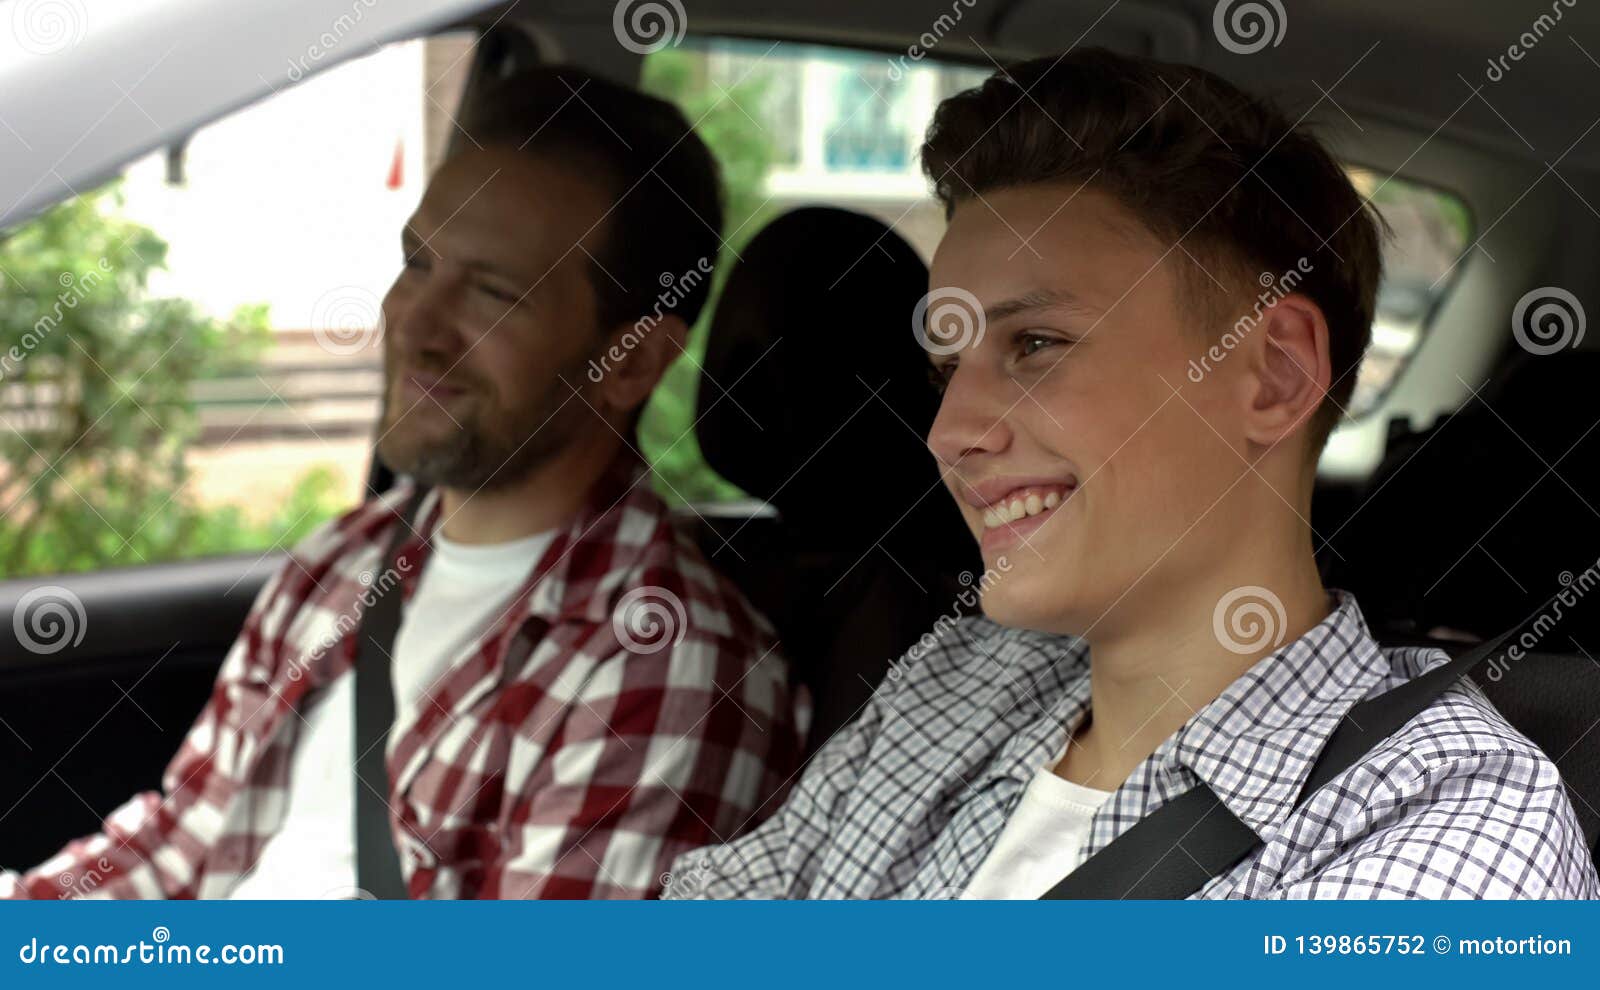 son with father testing new bought car, dad teaching teen boy to drive auto